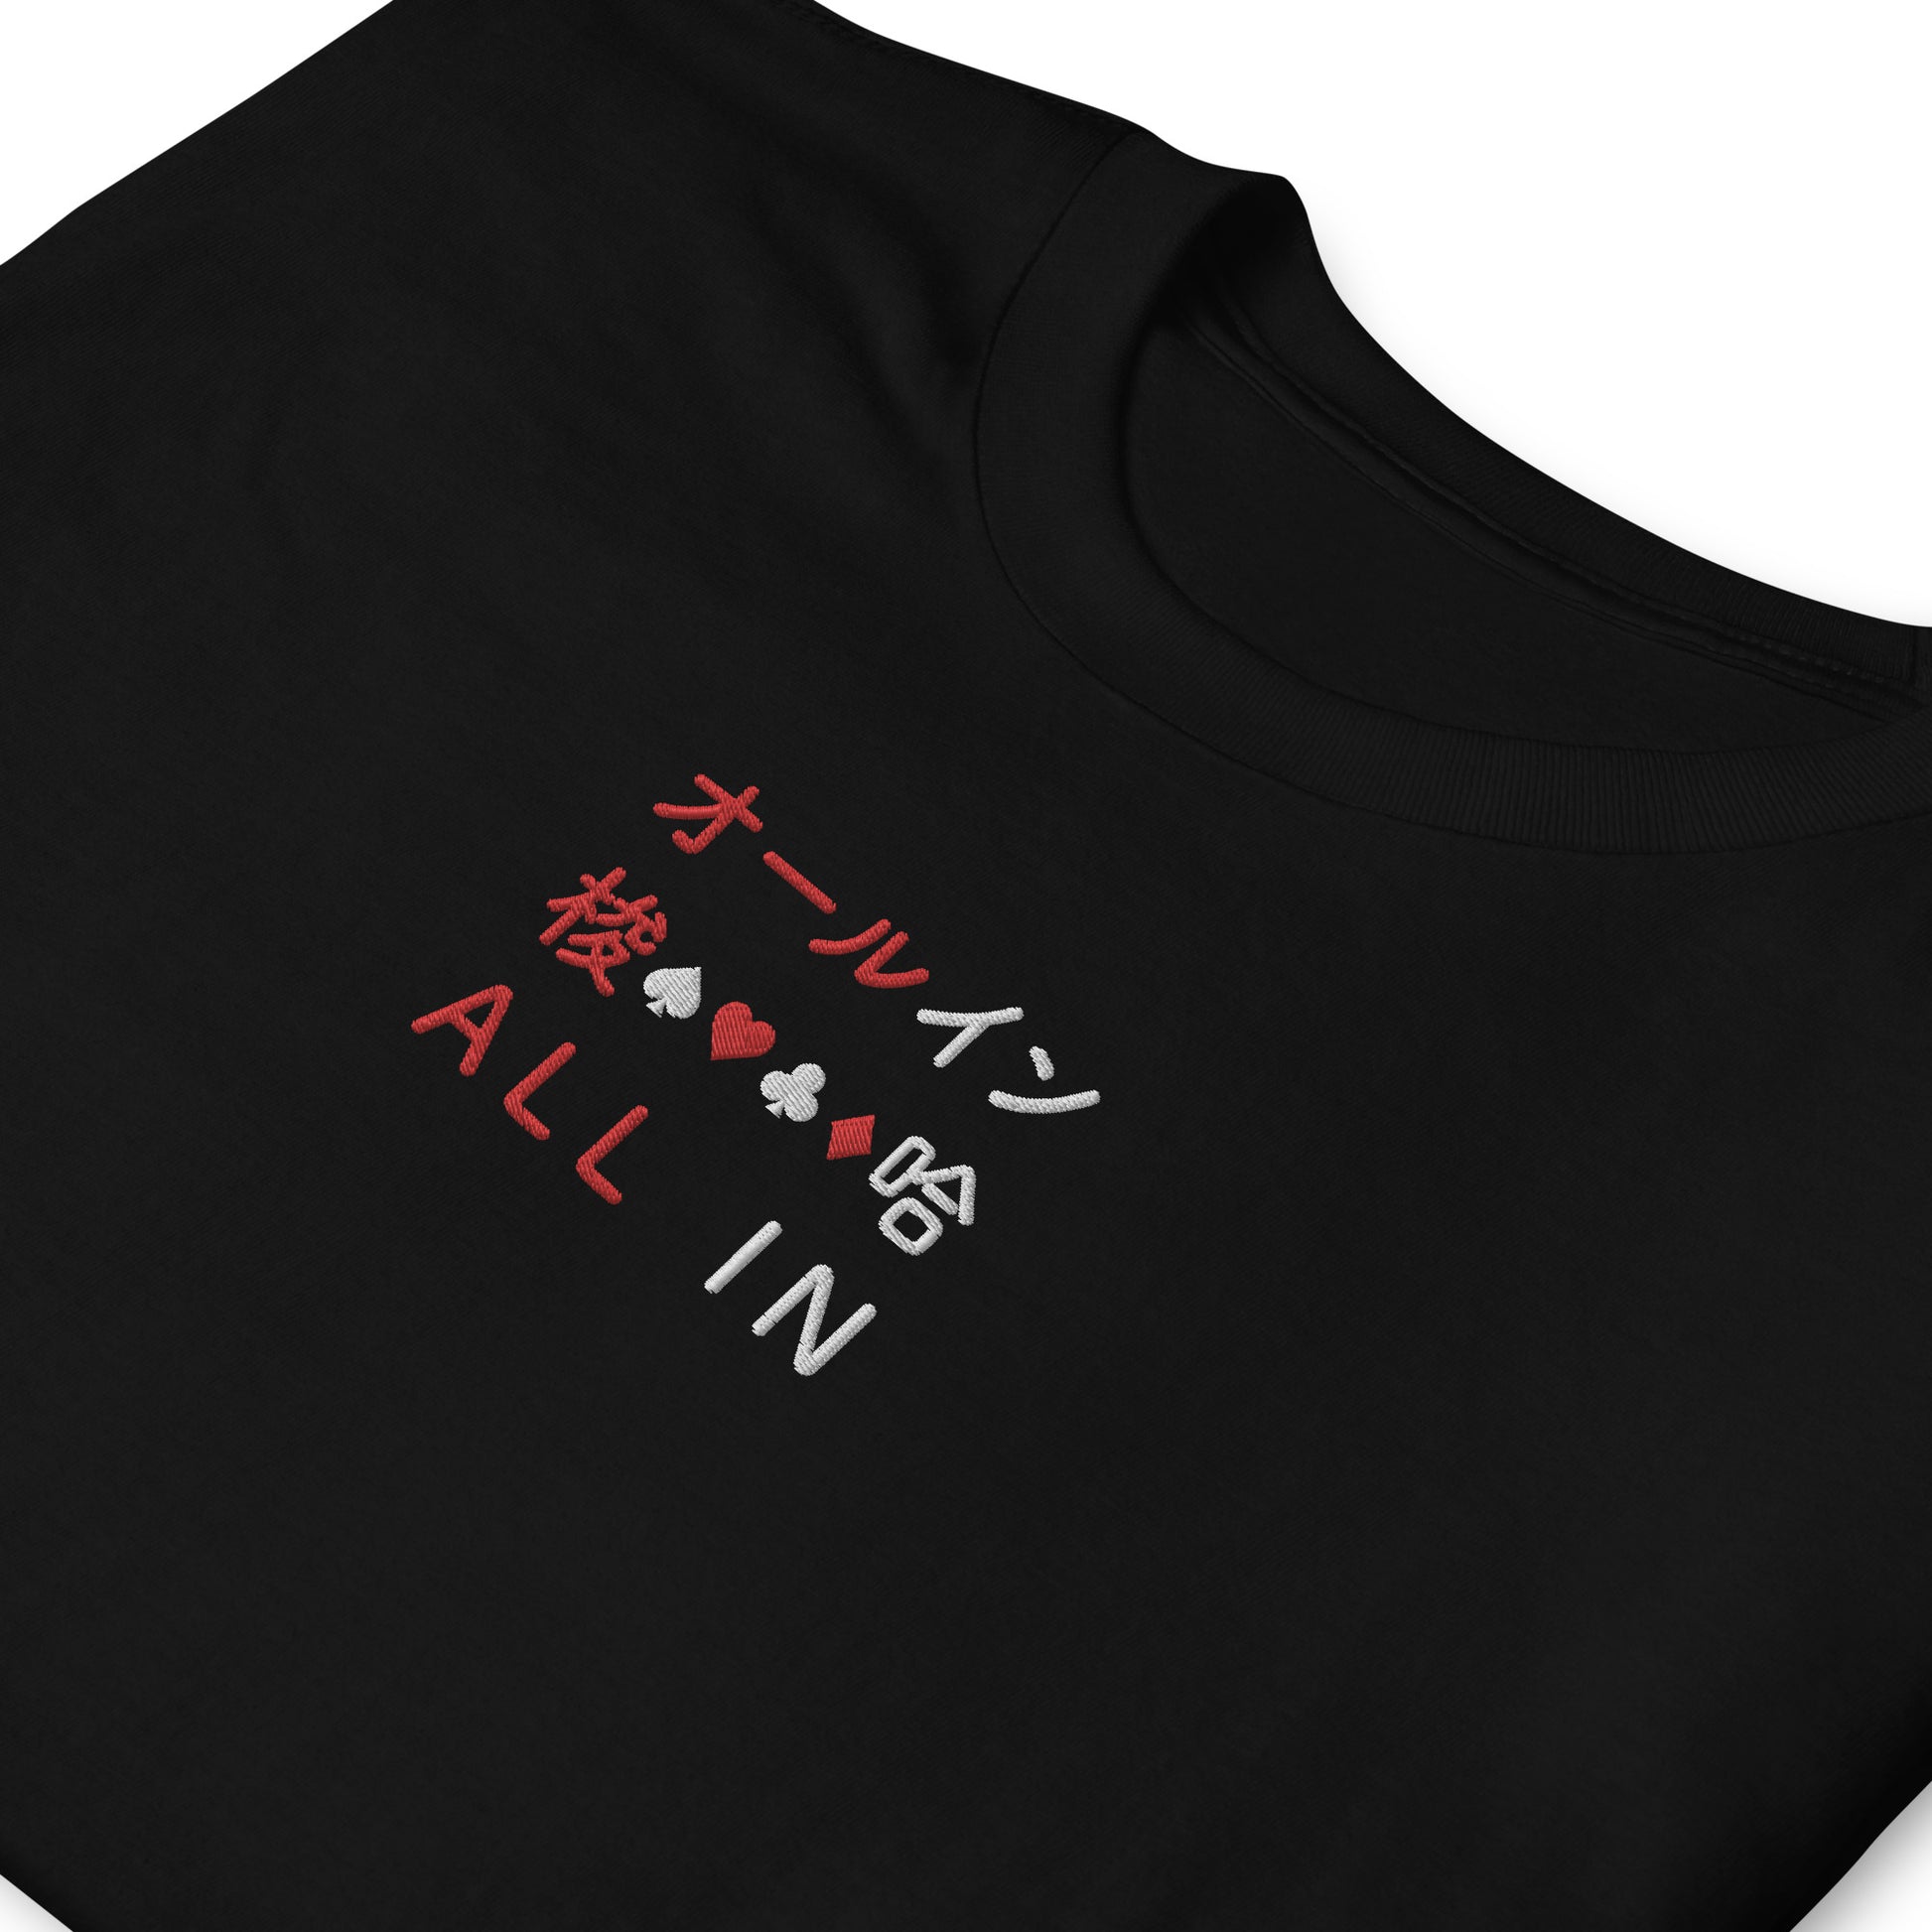 Black High Quality Tee - Front Design with an Red, White Embroidery "All IN" in Japanese,Chinese and English